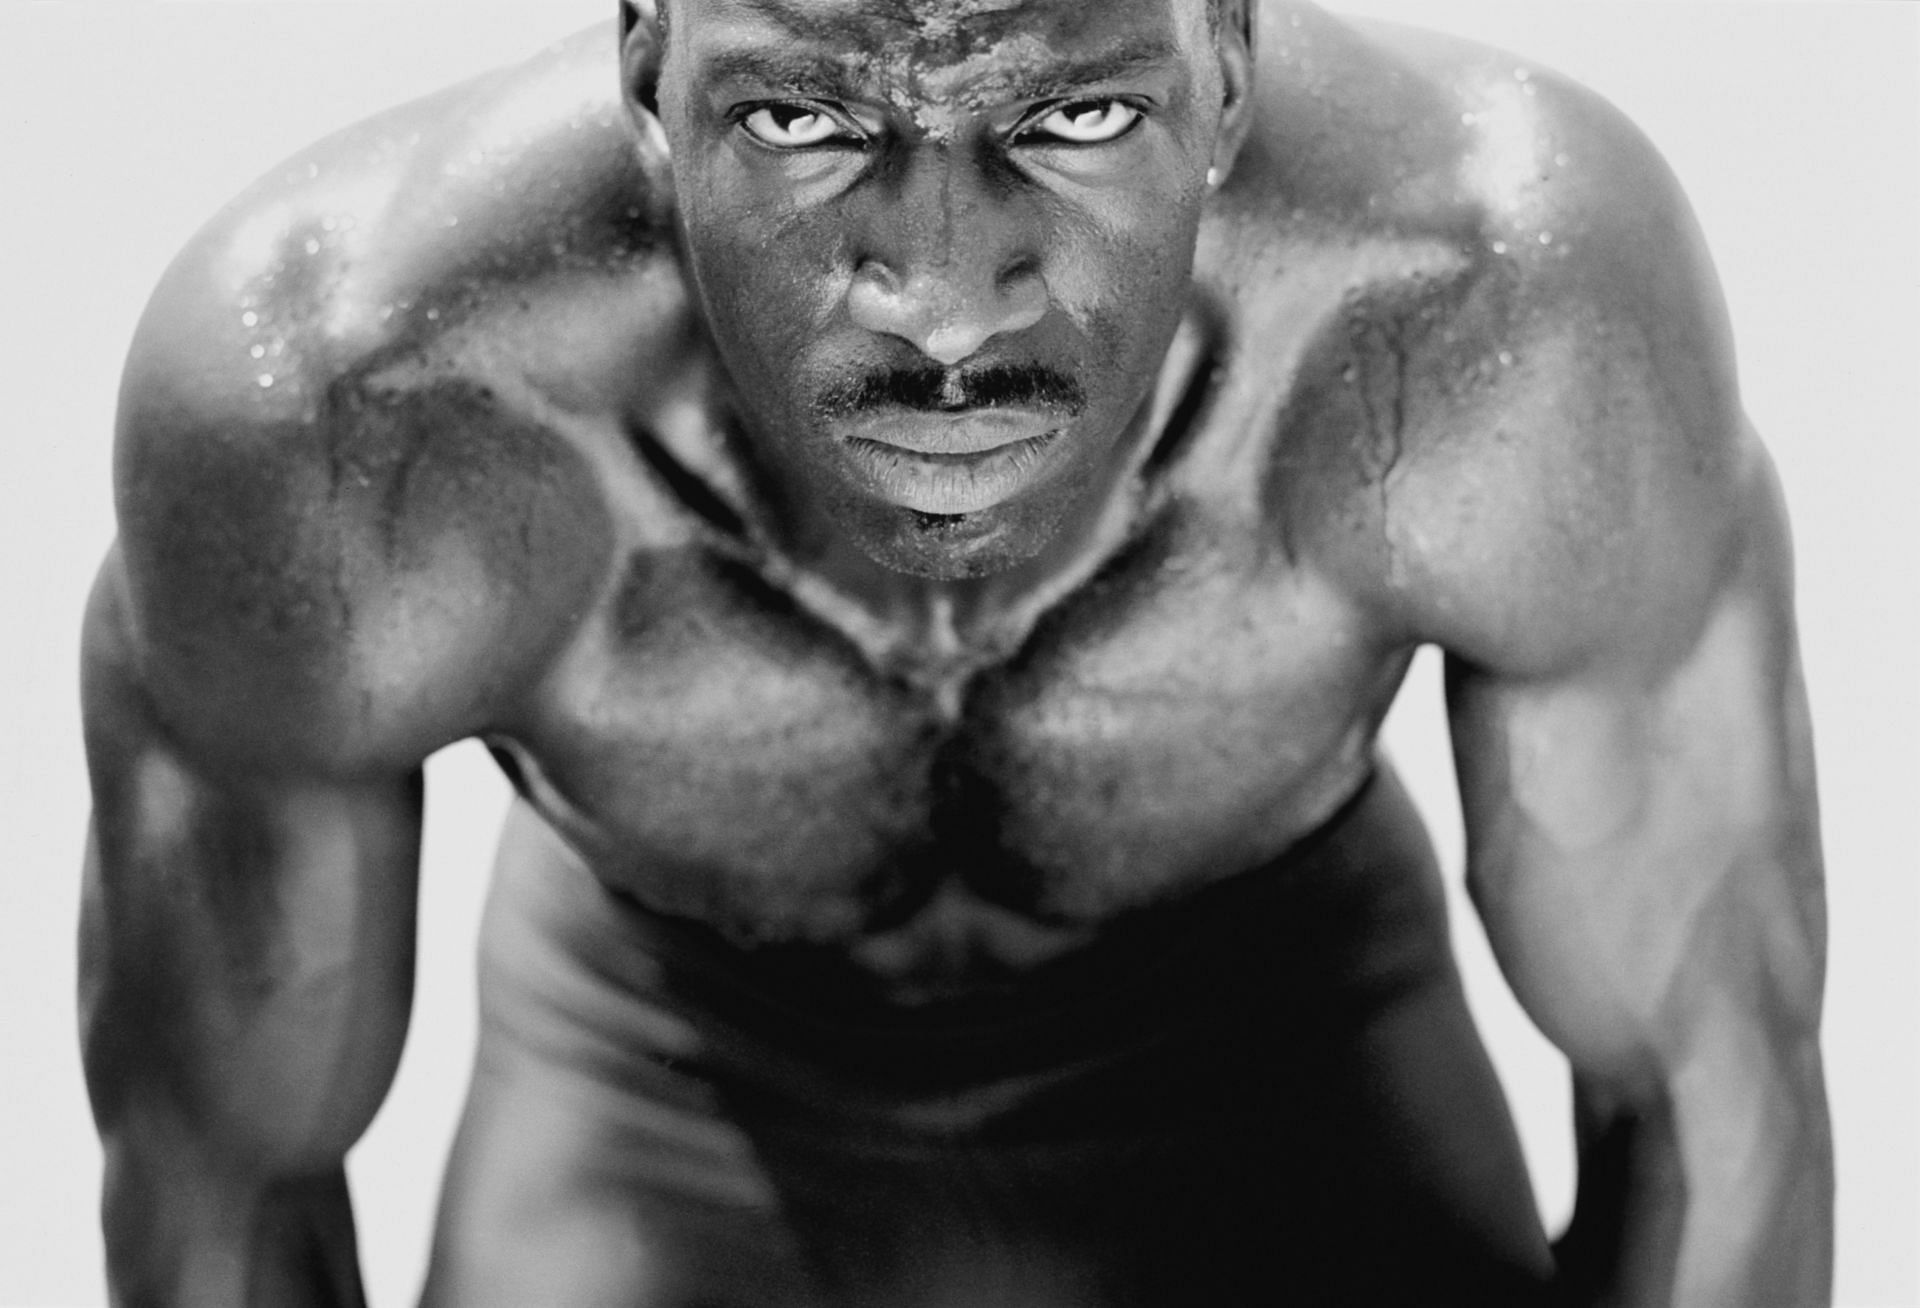 A portrait of Olympic and World Championship Gold medal winner and American sprinter, Michael Johnson